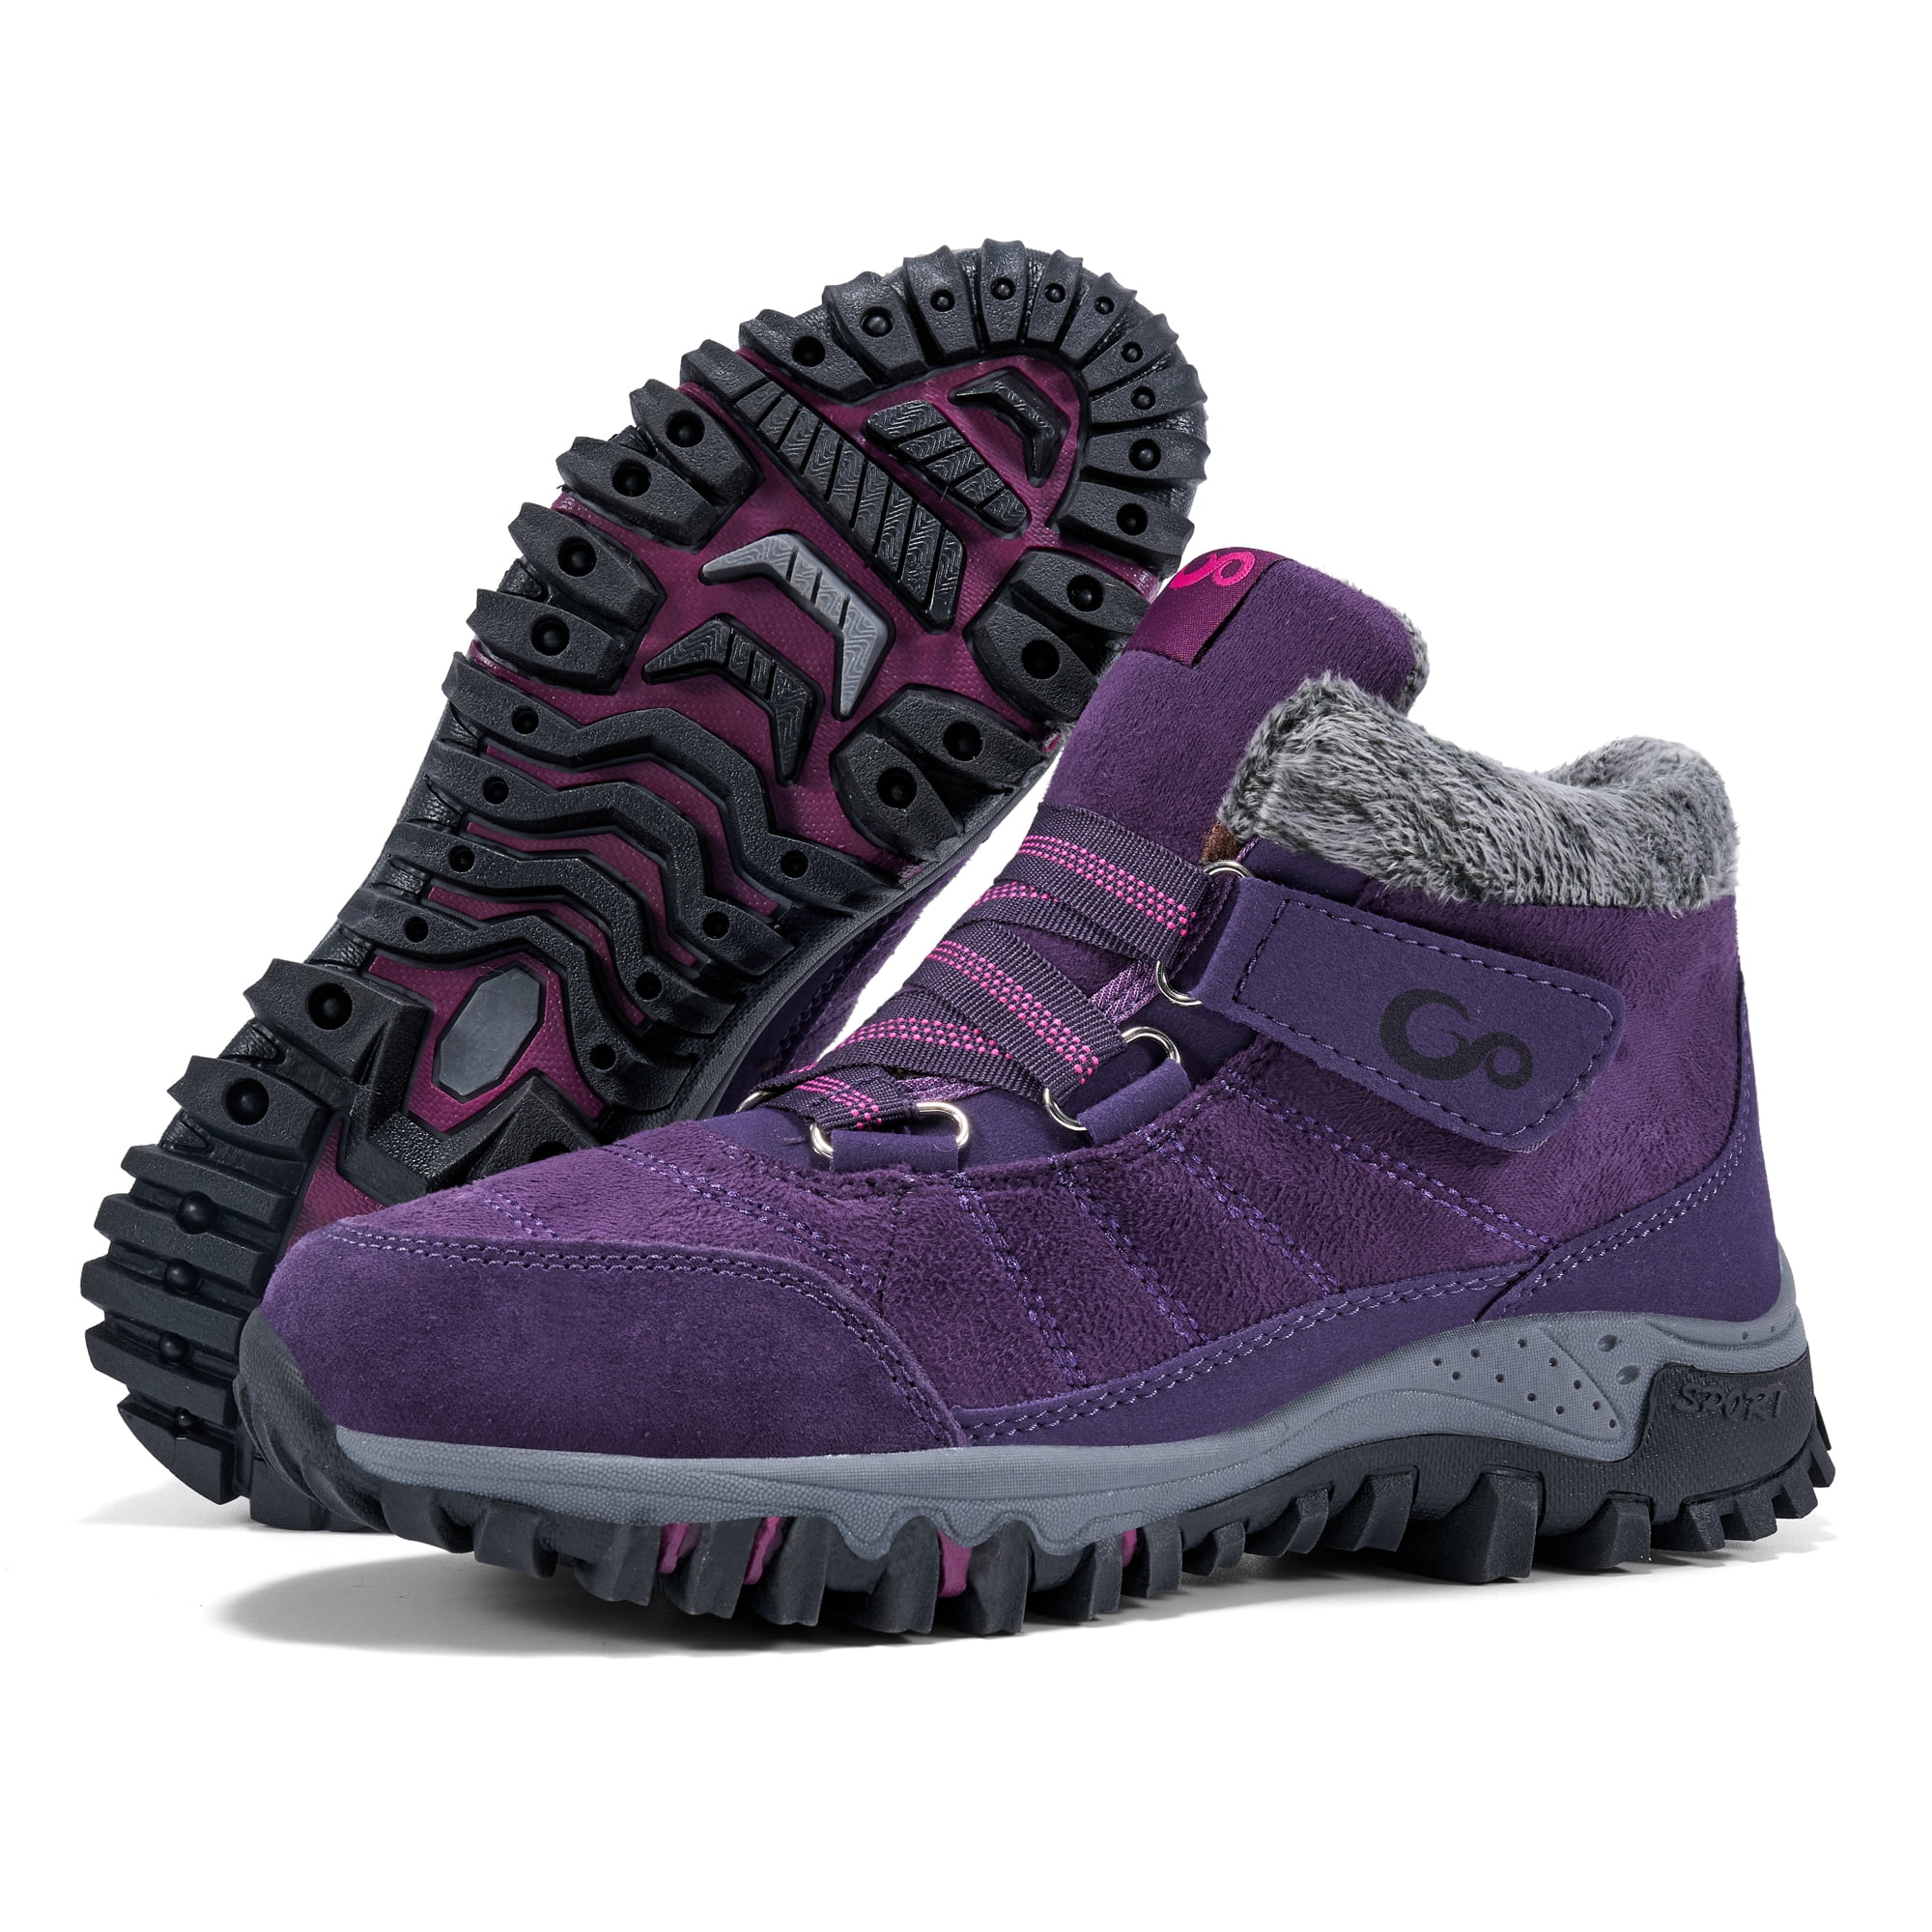 ,Violet Aemember Winter Snow Boots Female Students A Warm Flat Slip Short Boots Short Tube Shoes,250 For 36, 37 Yards